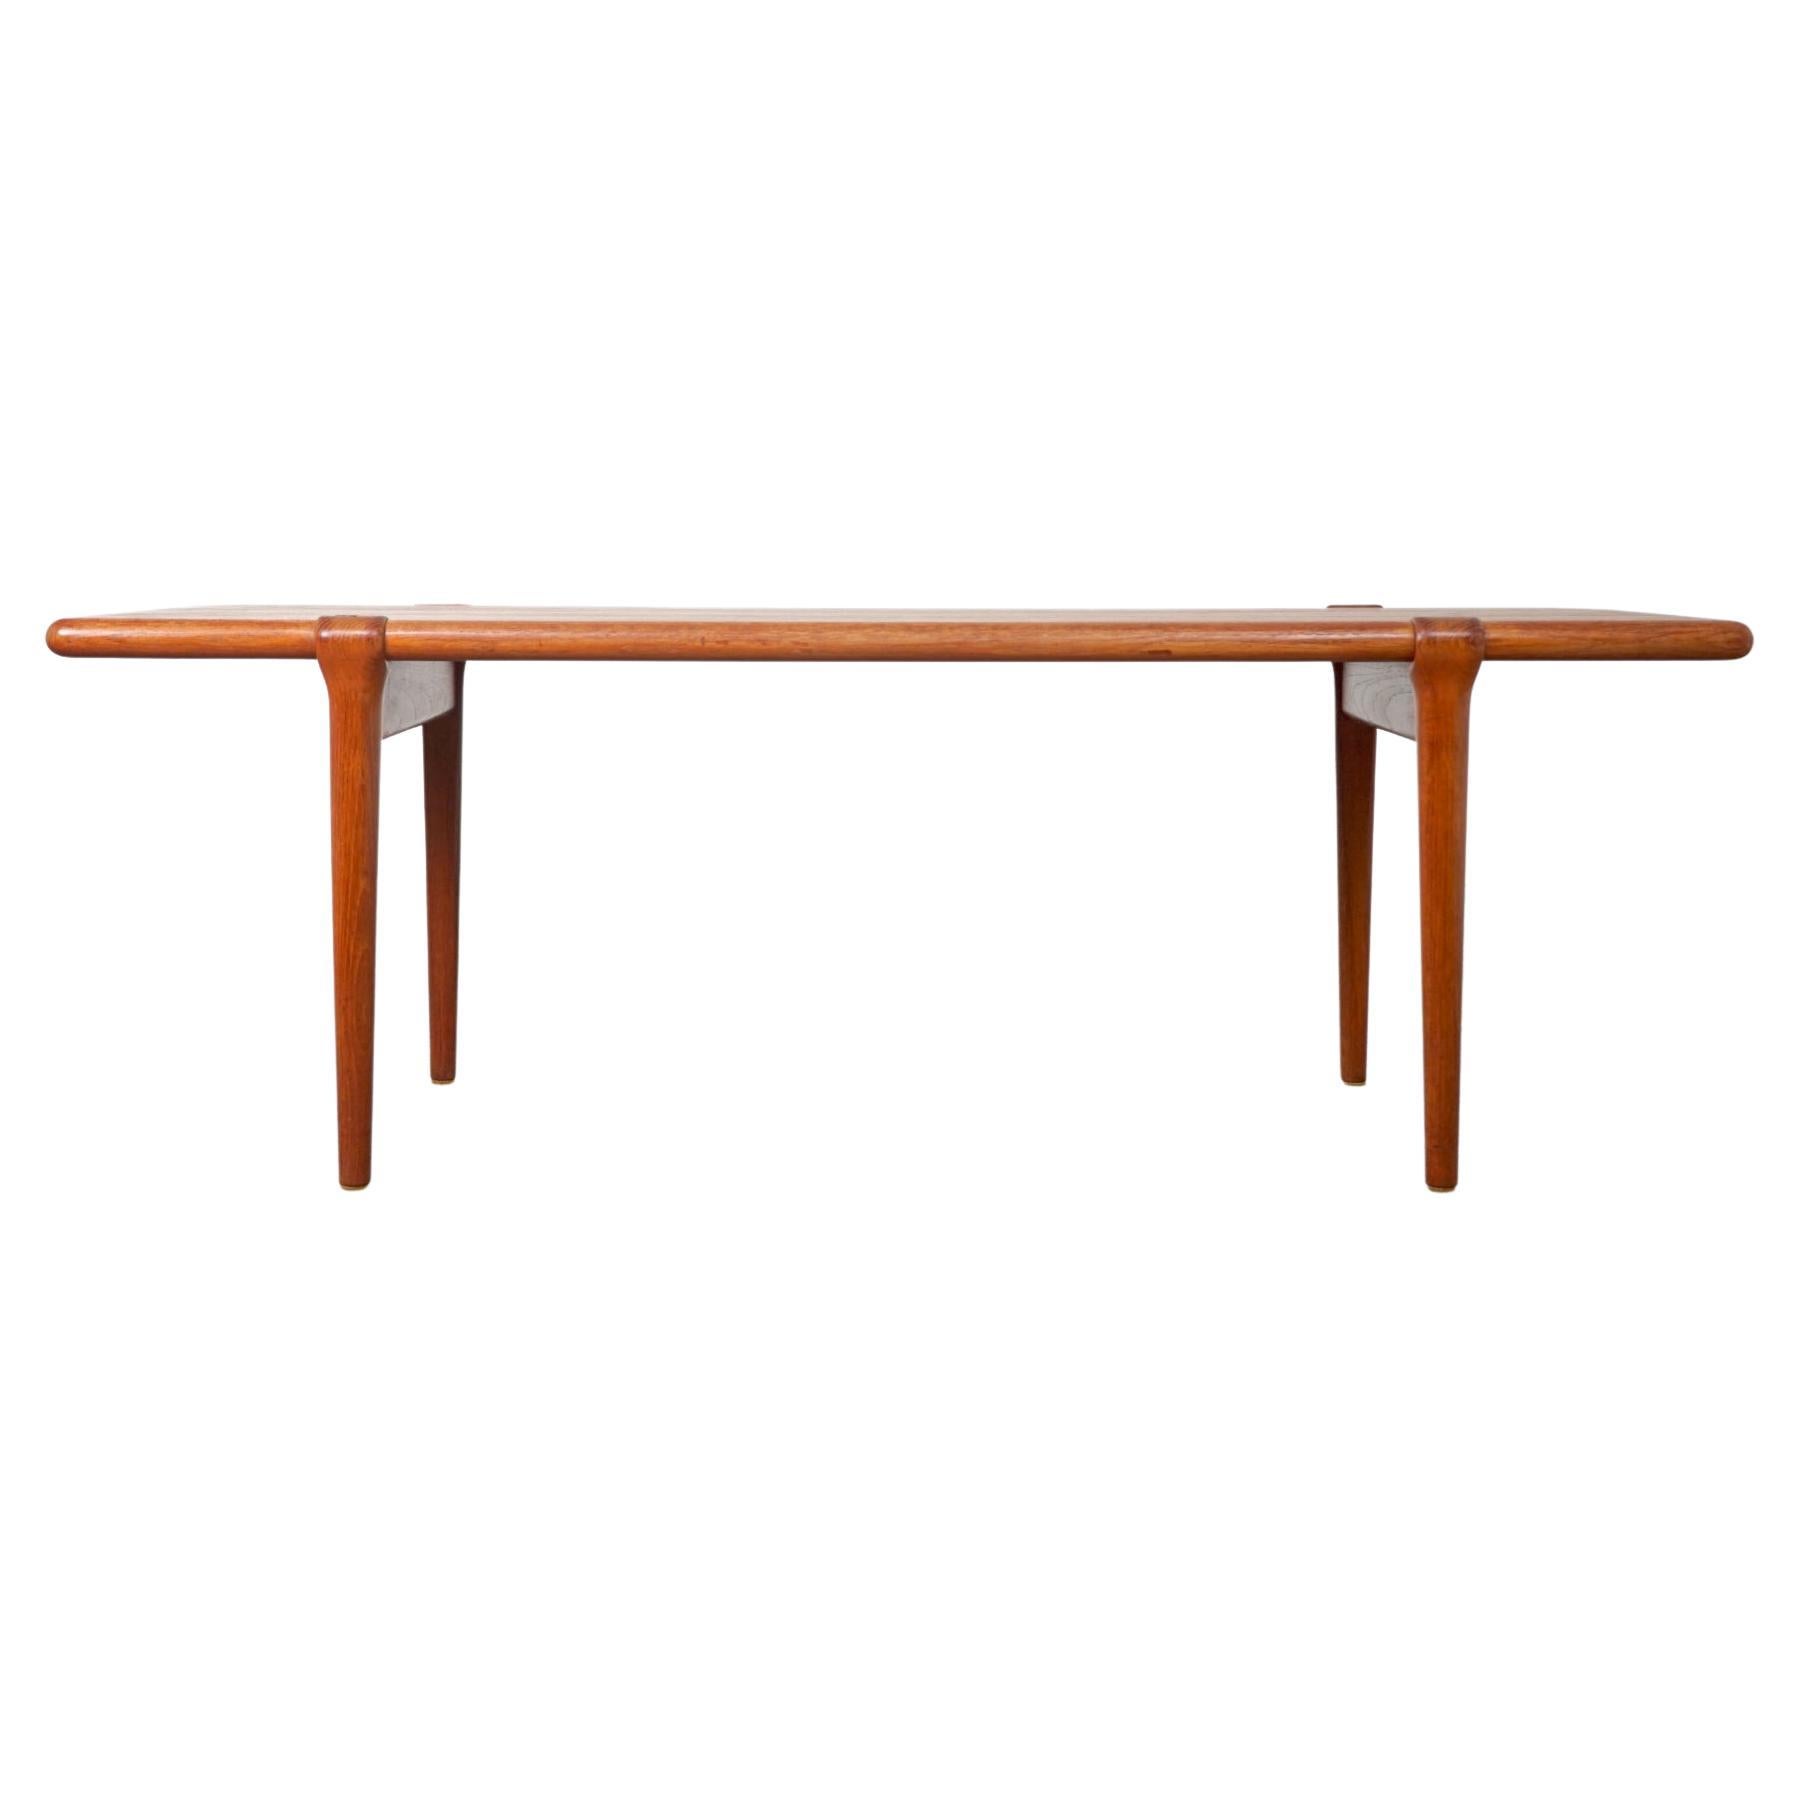 Teak tall Danish coffee table designed by Niels Moller, circa 1960's. Beautiful book matched veneer on top surface, solid wood curved edge along its length. Sculpted legs that curve over the top edge make this a unique piece. Stunning.

Finish has